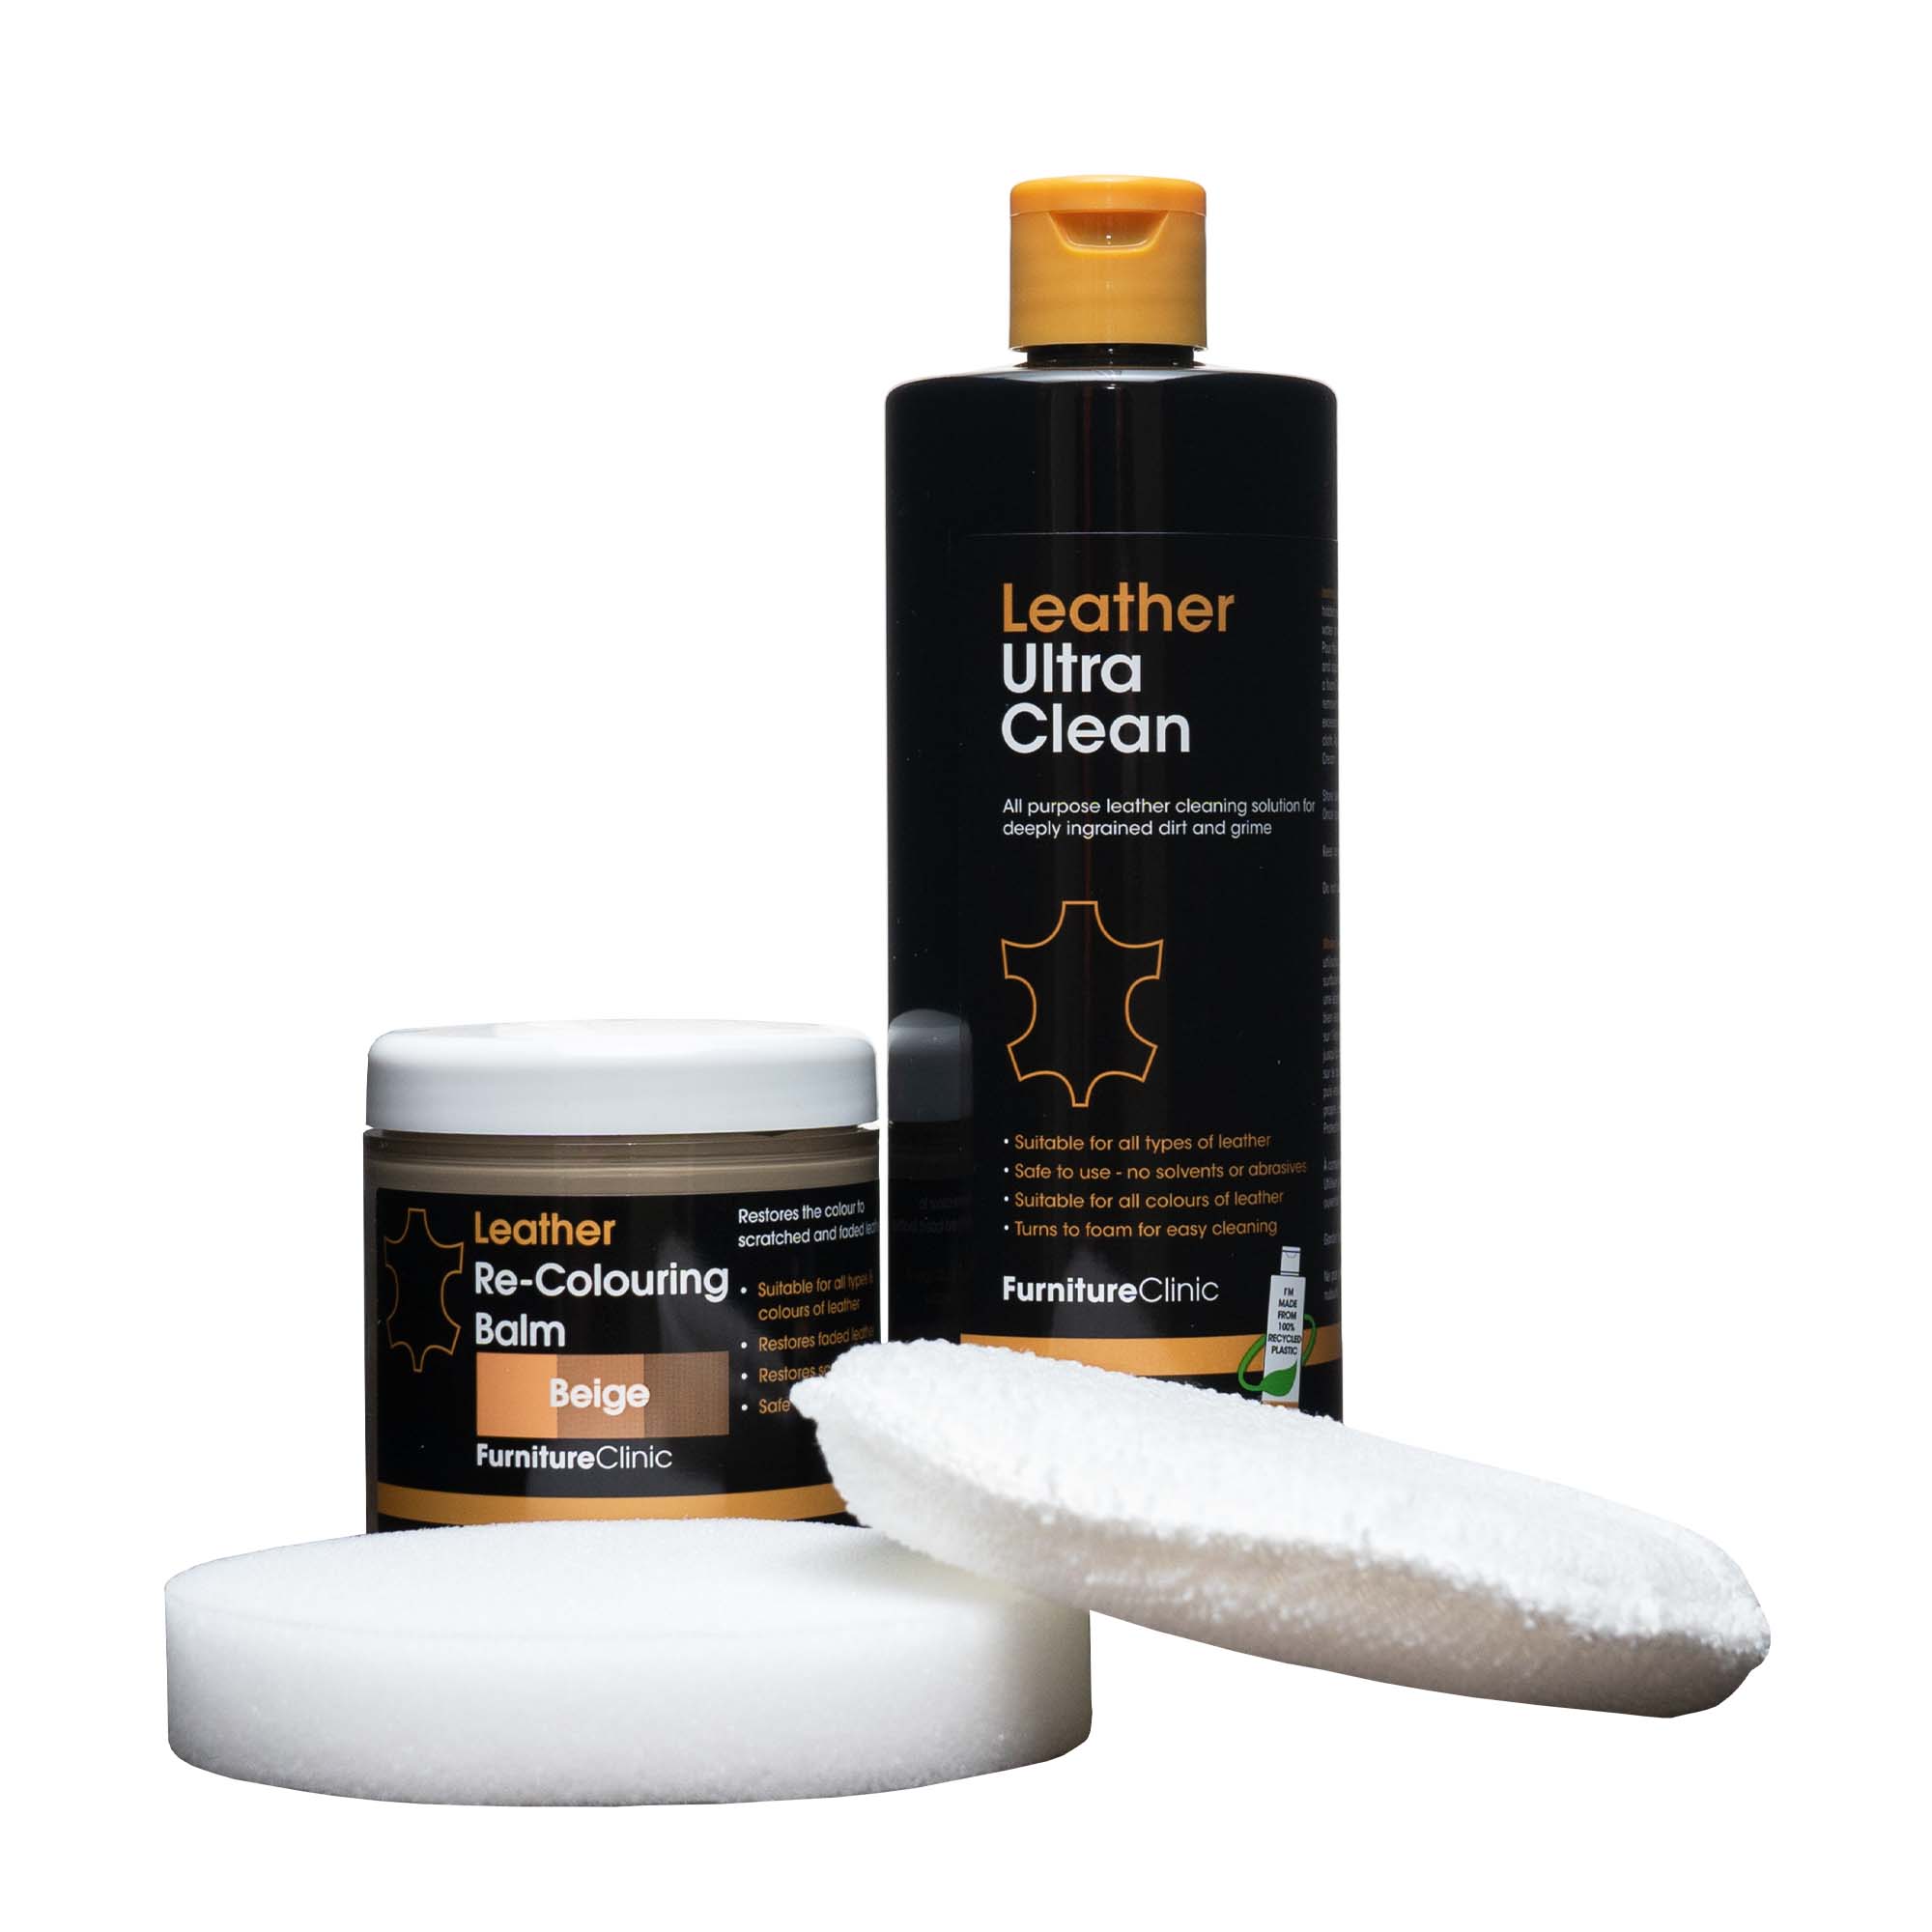 Furniture Clinic Leather Complete Restoration Kit, Includes Leather  Re-Coloring Balm, Leather Cleaner, Protection Cream, Sponge & Cloth